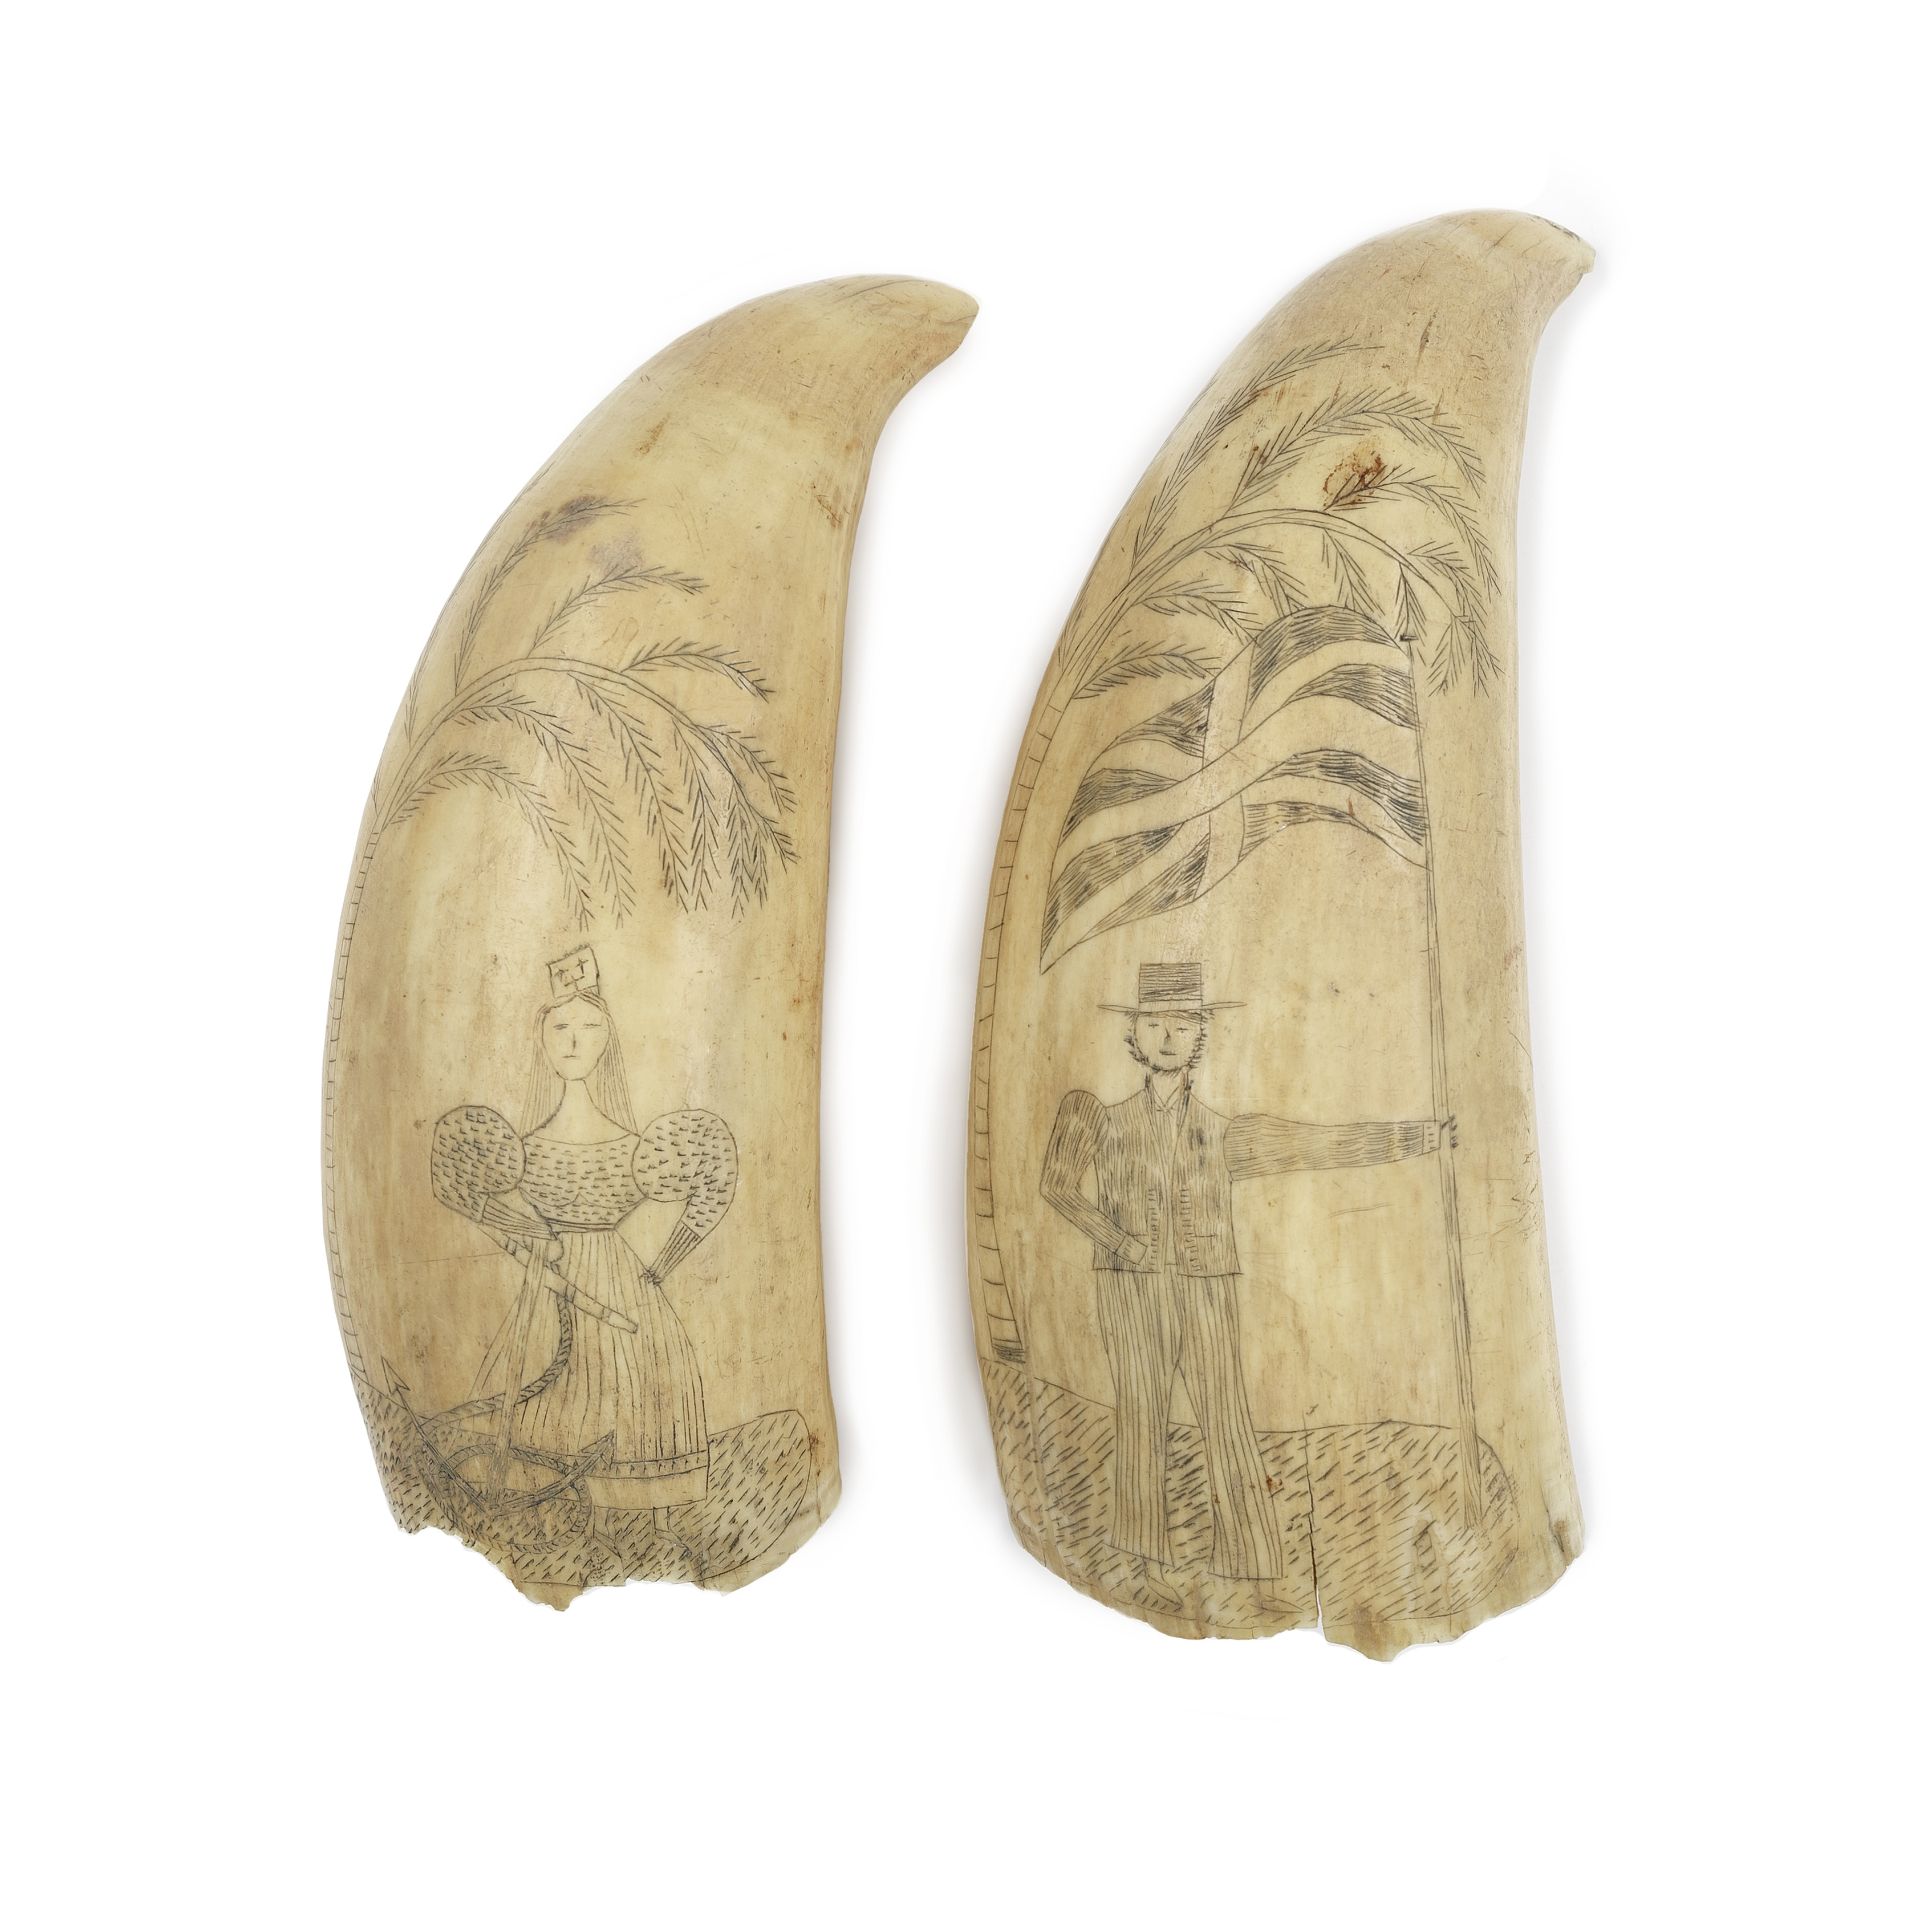 A pair of scrimshawed whale's teeth, English, mid 19th century, (2)